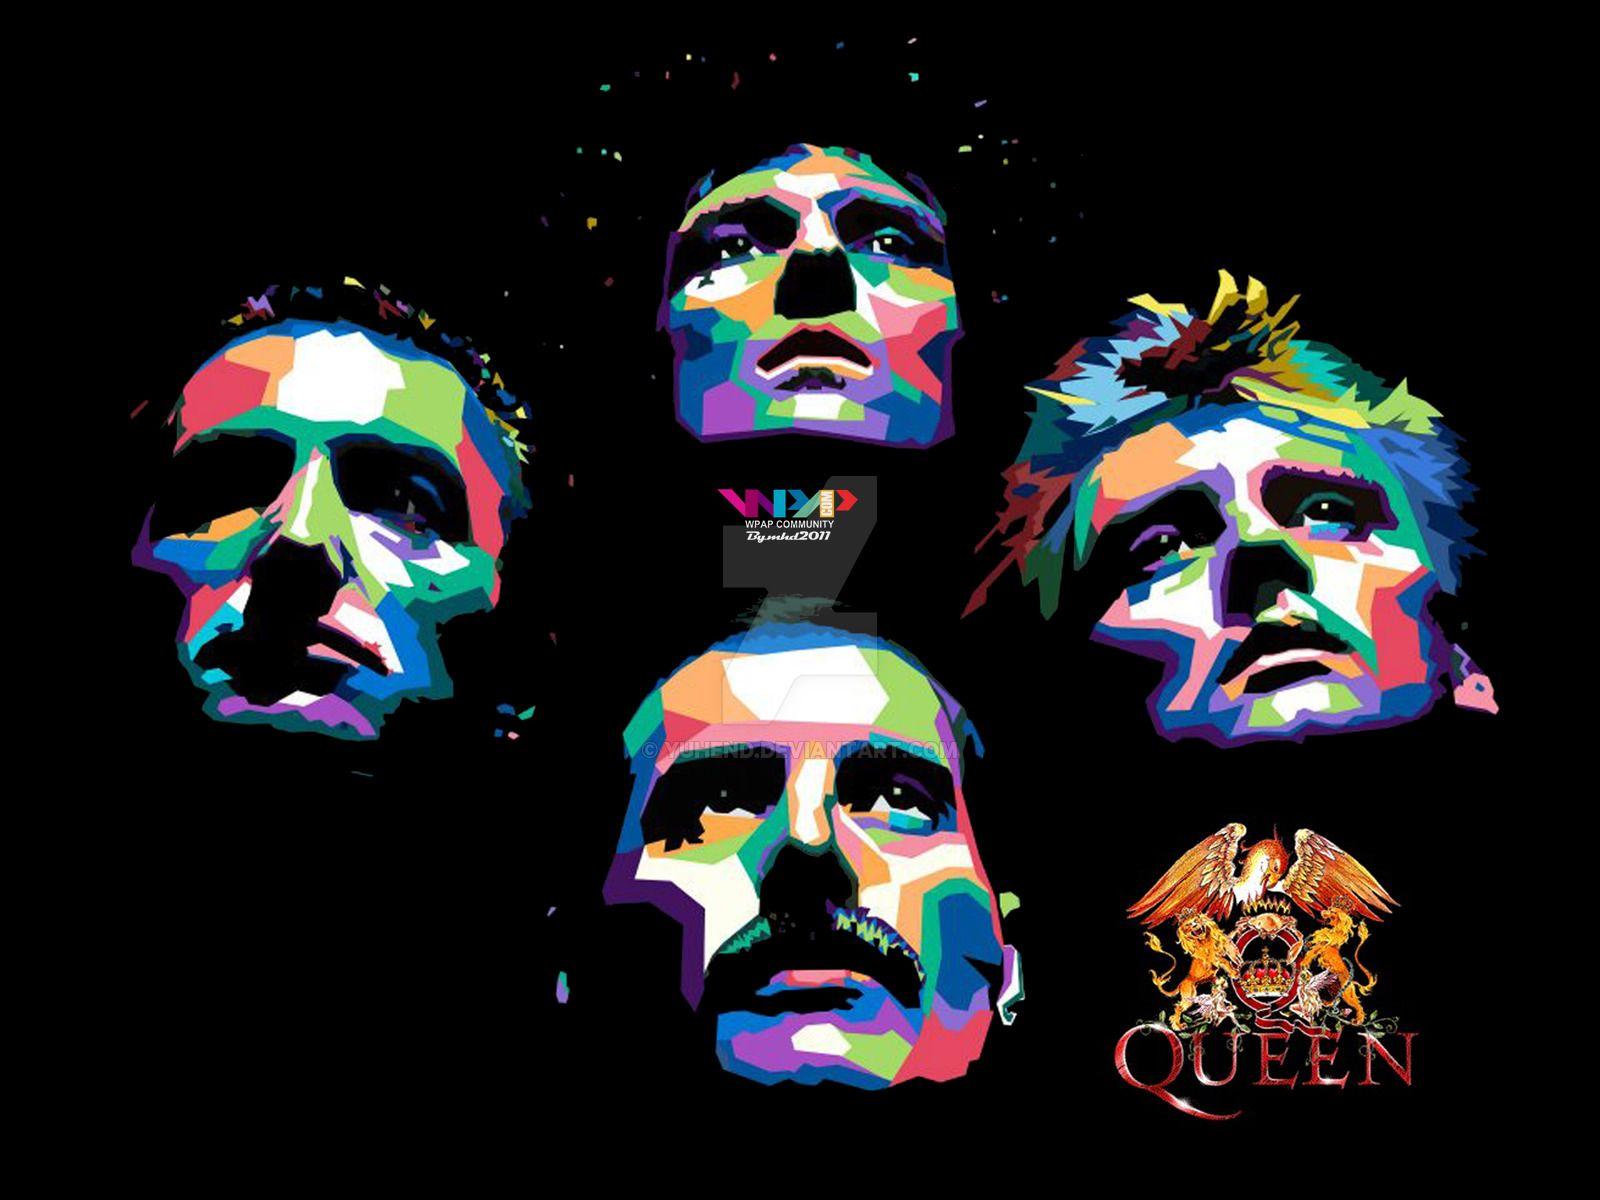 Queen with freddy mercury picture Image Search Results